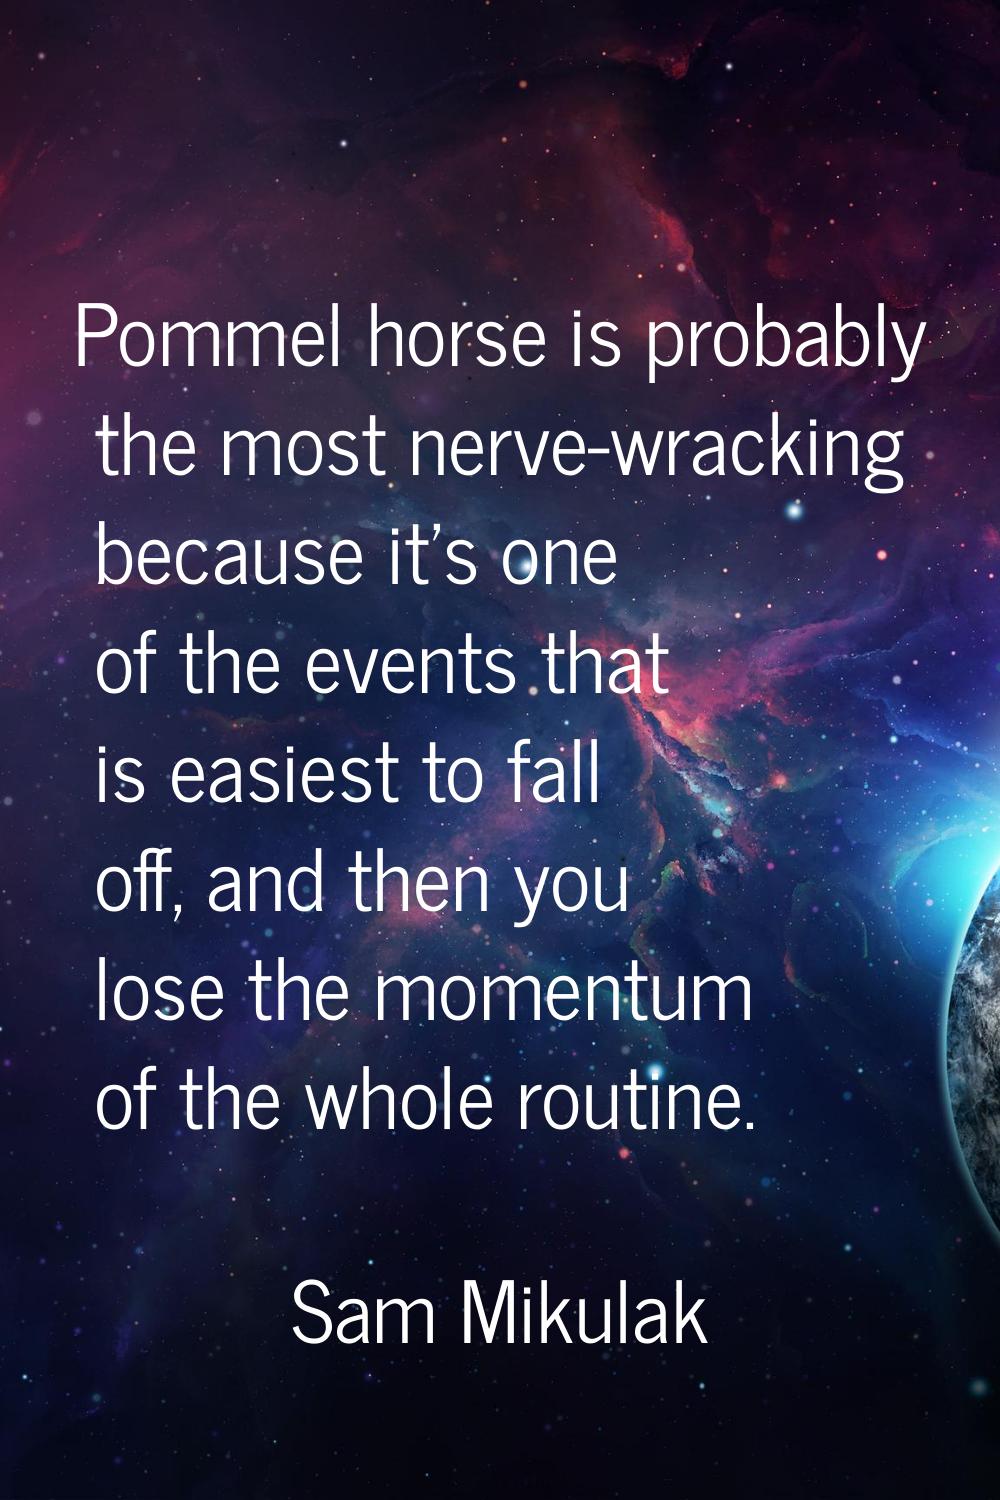 Pommel horse is probably the most nerve-wracking because it's one of the events that is easiest to 